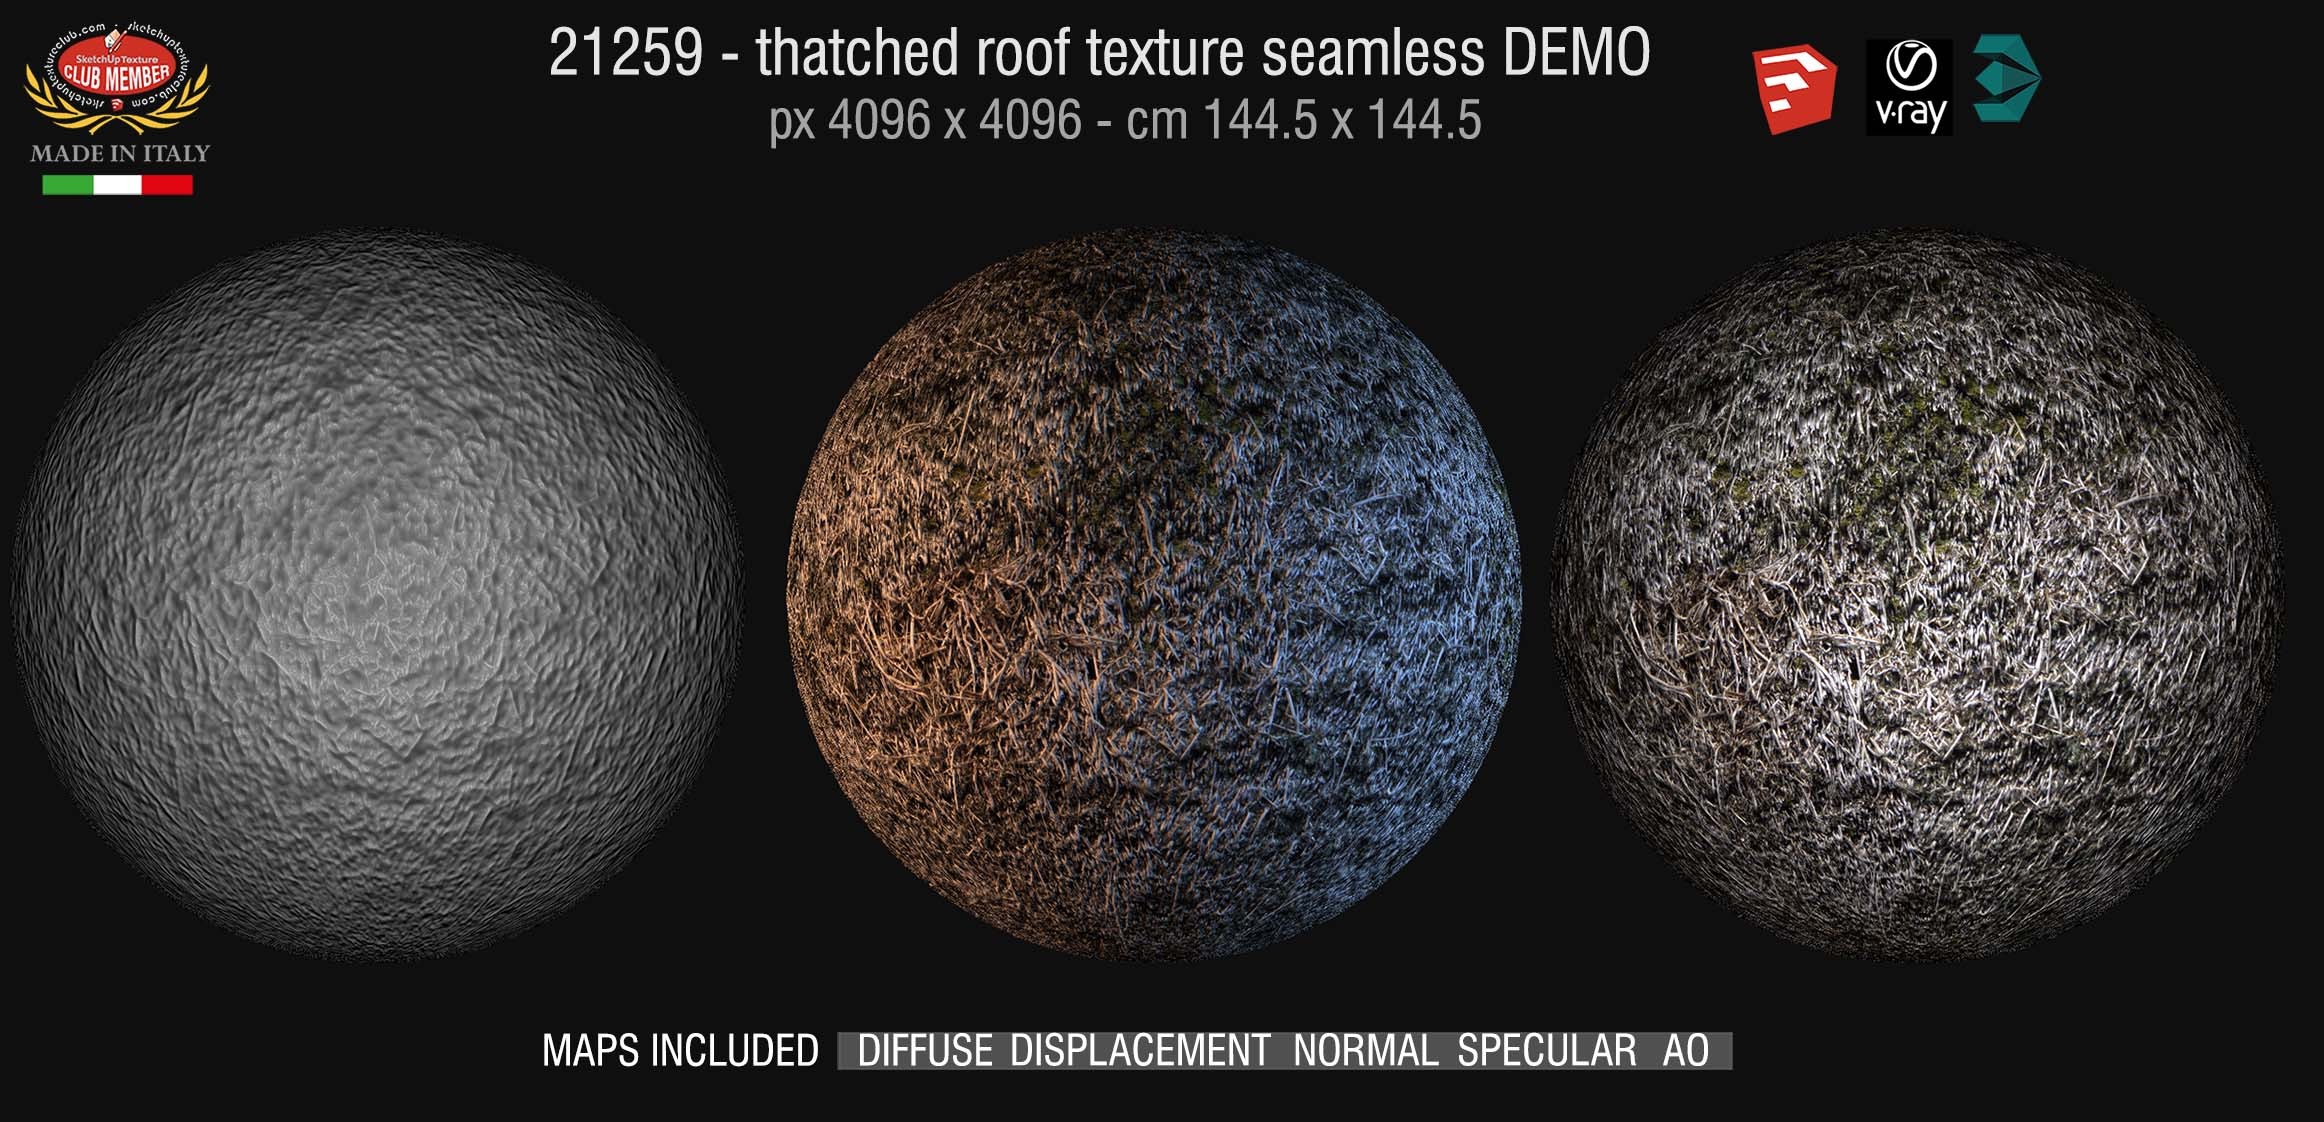 21259 Thatched roof texture + maps DEMO